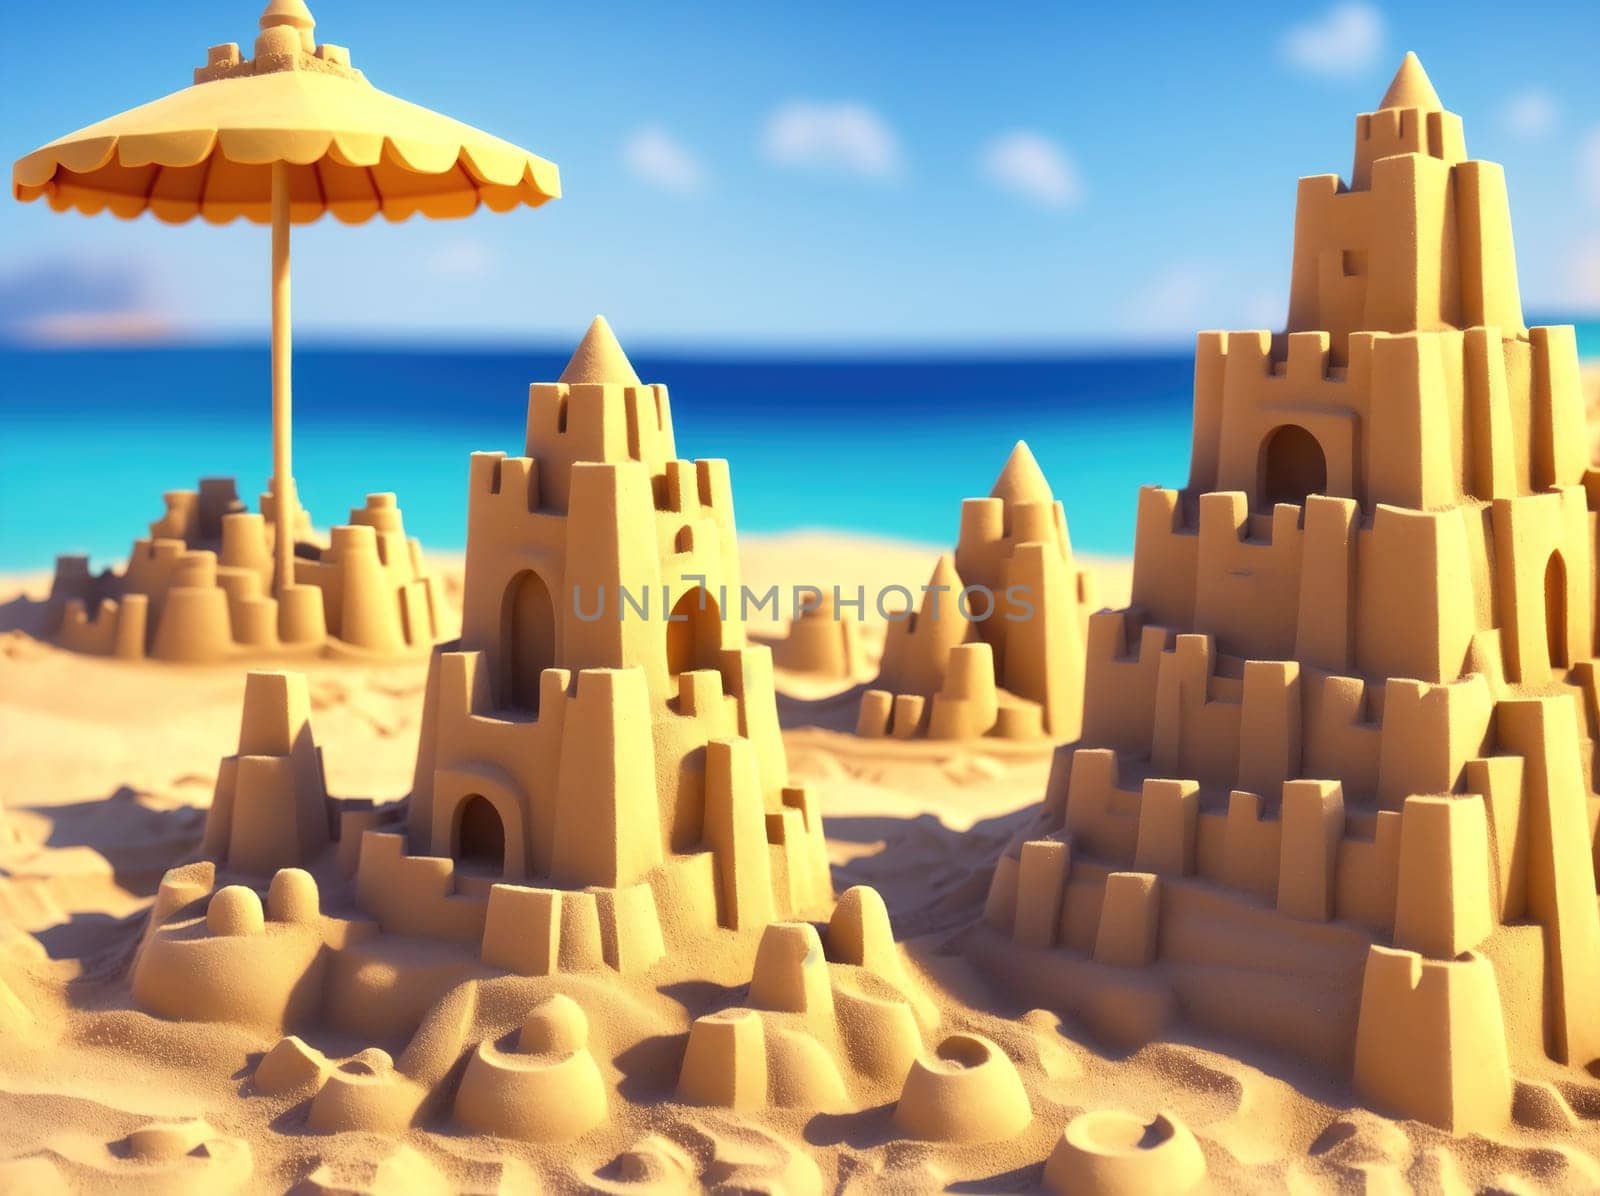 The image is a sandcastle with an umbrella on top of it, standing on a beach with a blue sky in the background.